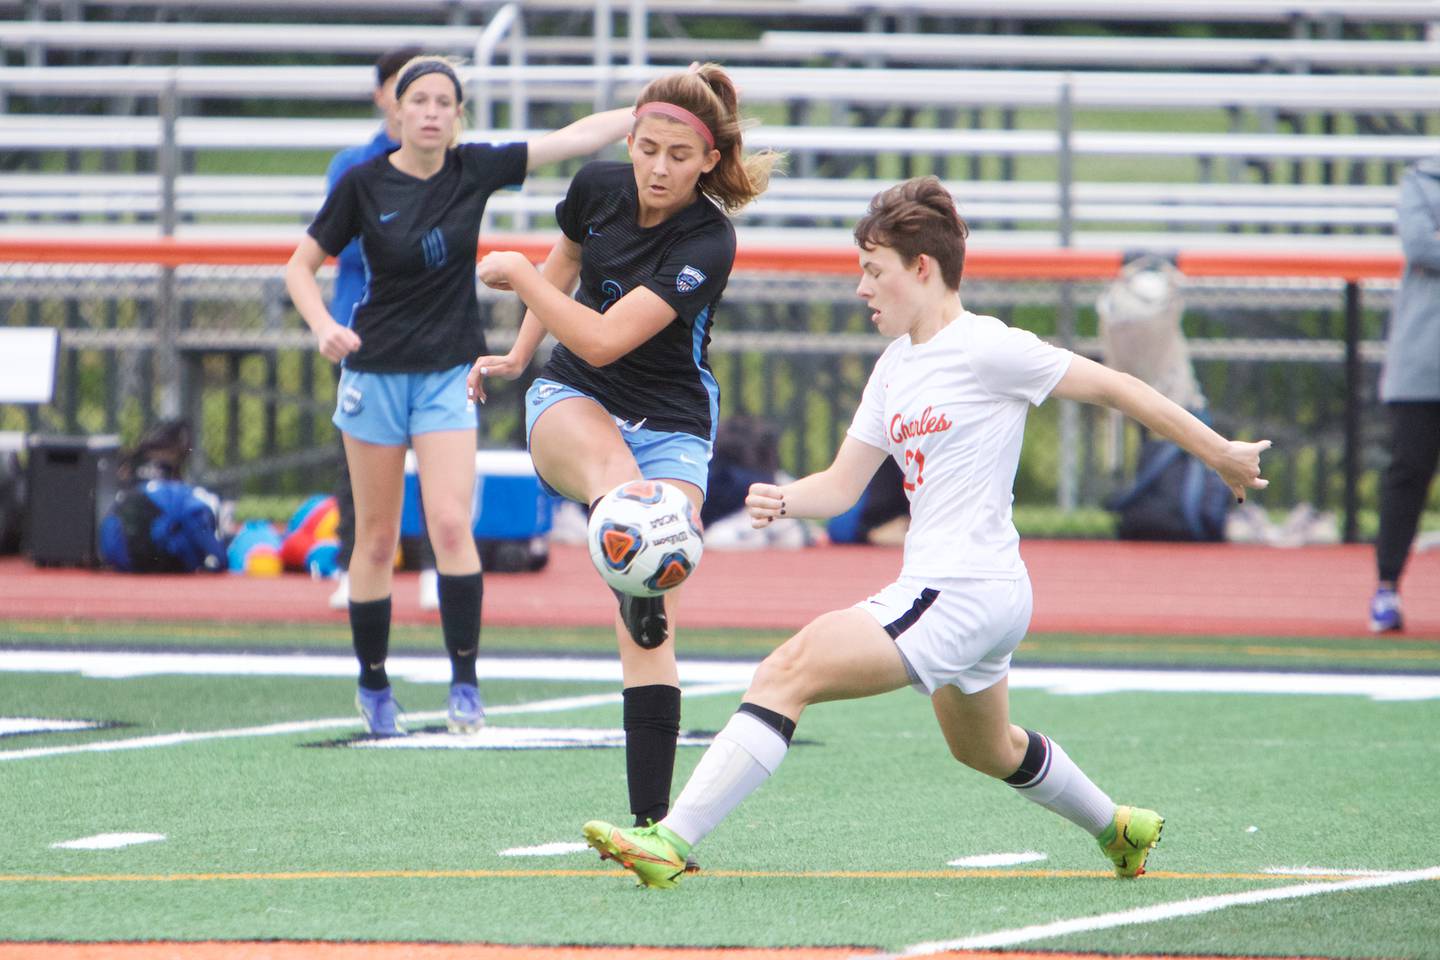 St. Charles North's Kayla Floyd battles for the ball with St. Charles East's Kara Machala at the Class 3A Sectional Final on May 27, 2022 in St. Charles.